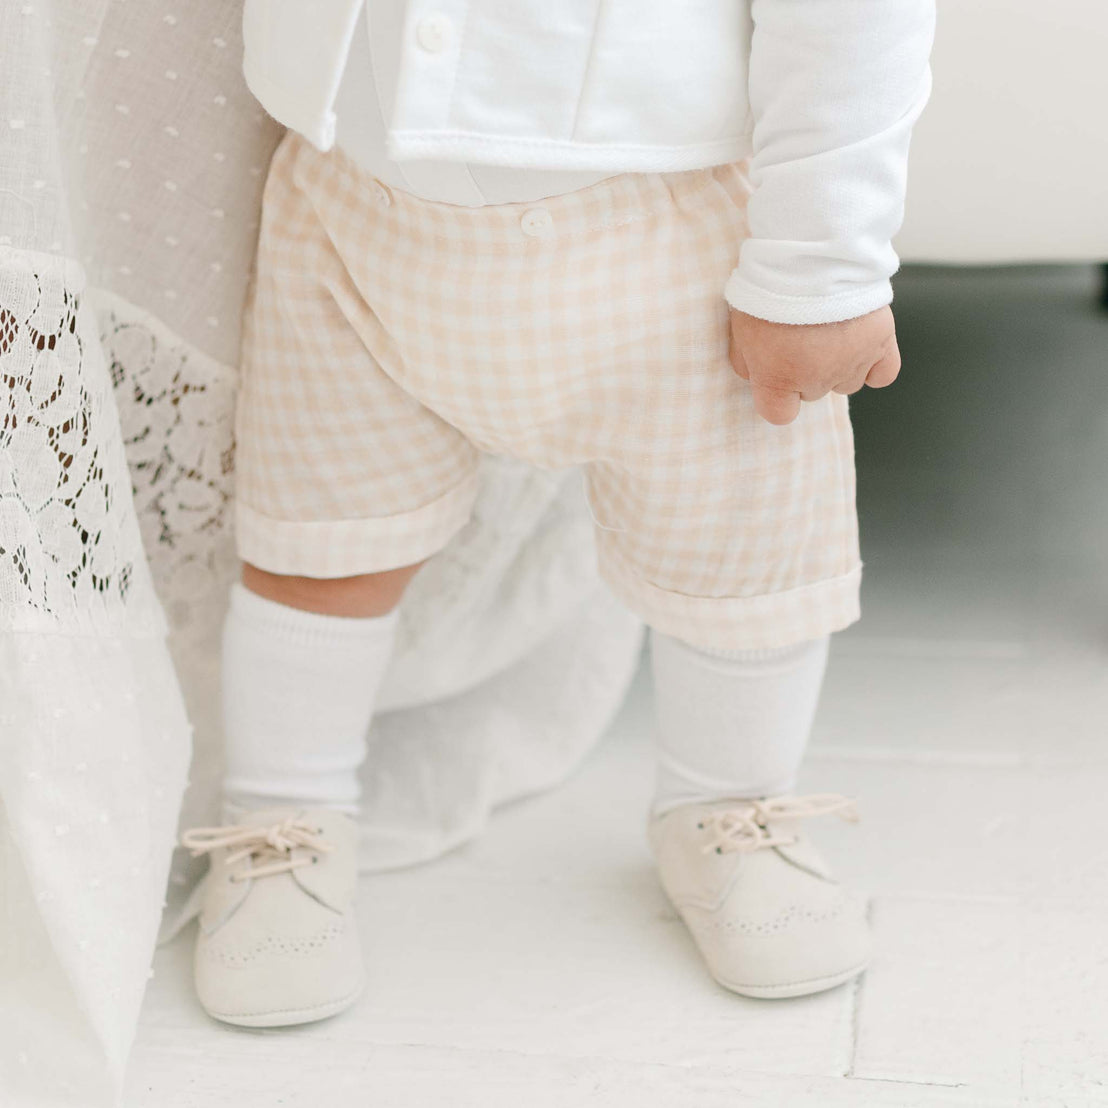 A toddler wearing an Ian Fawn Shorts Set, knee-high socks, and beige shoes standing near a white lace curtain, only the lower half of the body visible.